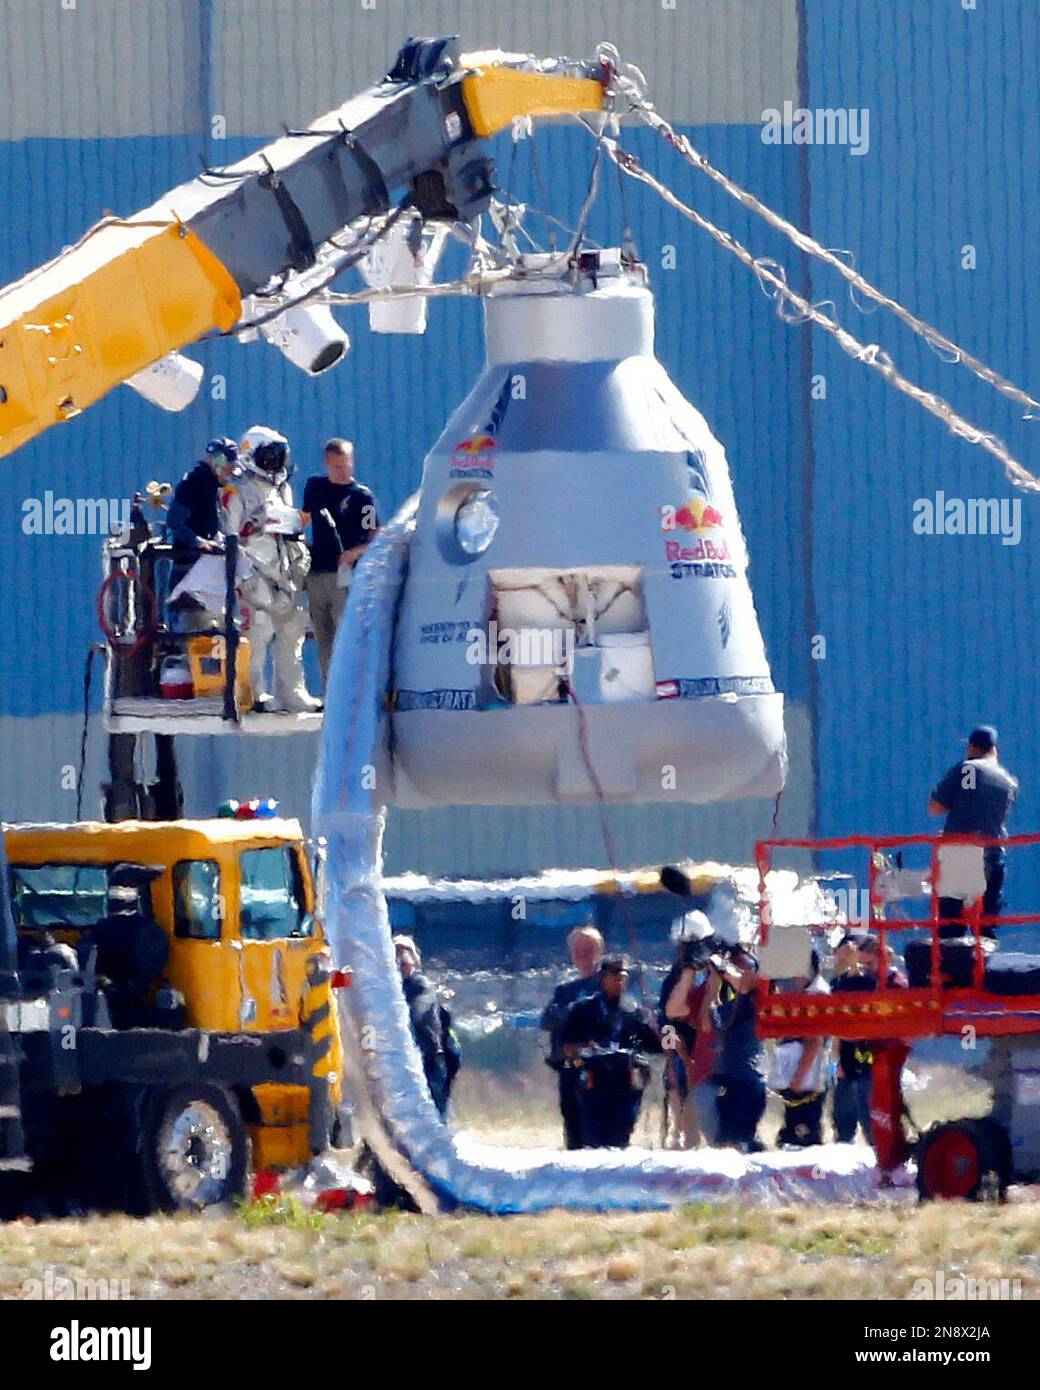 Felix Baumgartner, in pressurized suit on platform at left, prepares to enter the balloon capsule in Roswell, N.M. on Tuesday, Oct. 9, 2012. Baumgartner will attempt to break the speed of sound with his own body by jumping from the space capsule lifted by a 30 million cubic foot helium balloon. Baumgartner plans to jump from an altitude of 120,000 feet - an altitude chosen to enable him to achieve Mach 1 in freefall - which will deliver scientific data to the aerospace community about human survival from high altitudes. (AP Photo/Matt York) Stock Photo